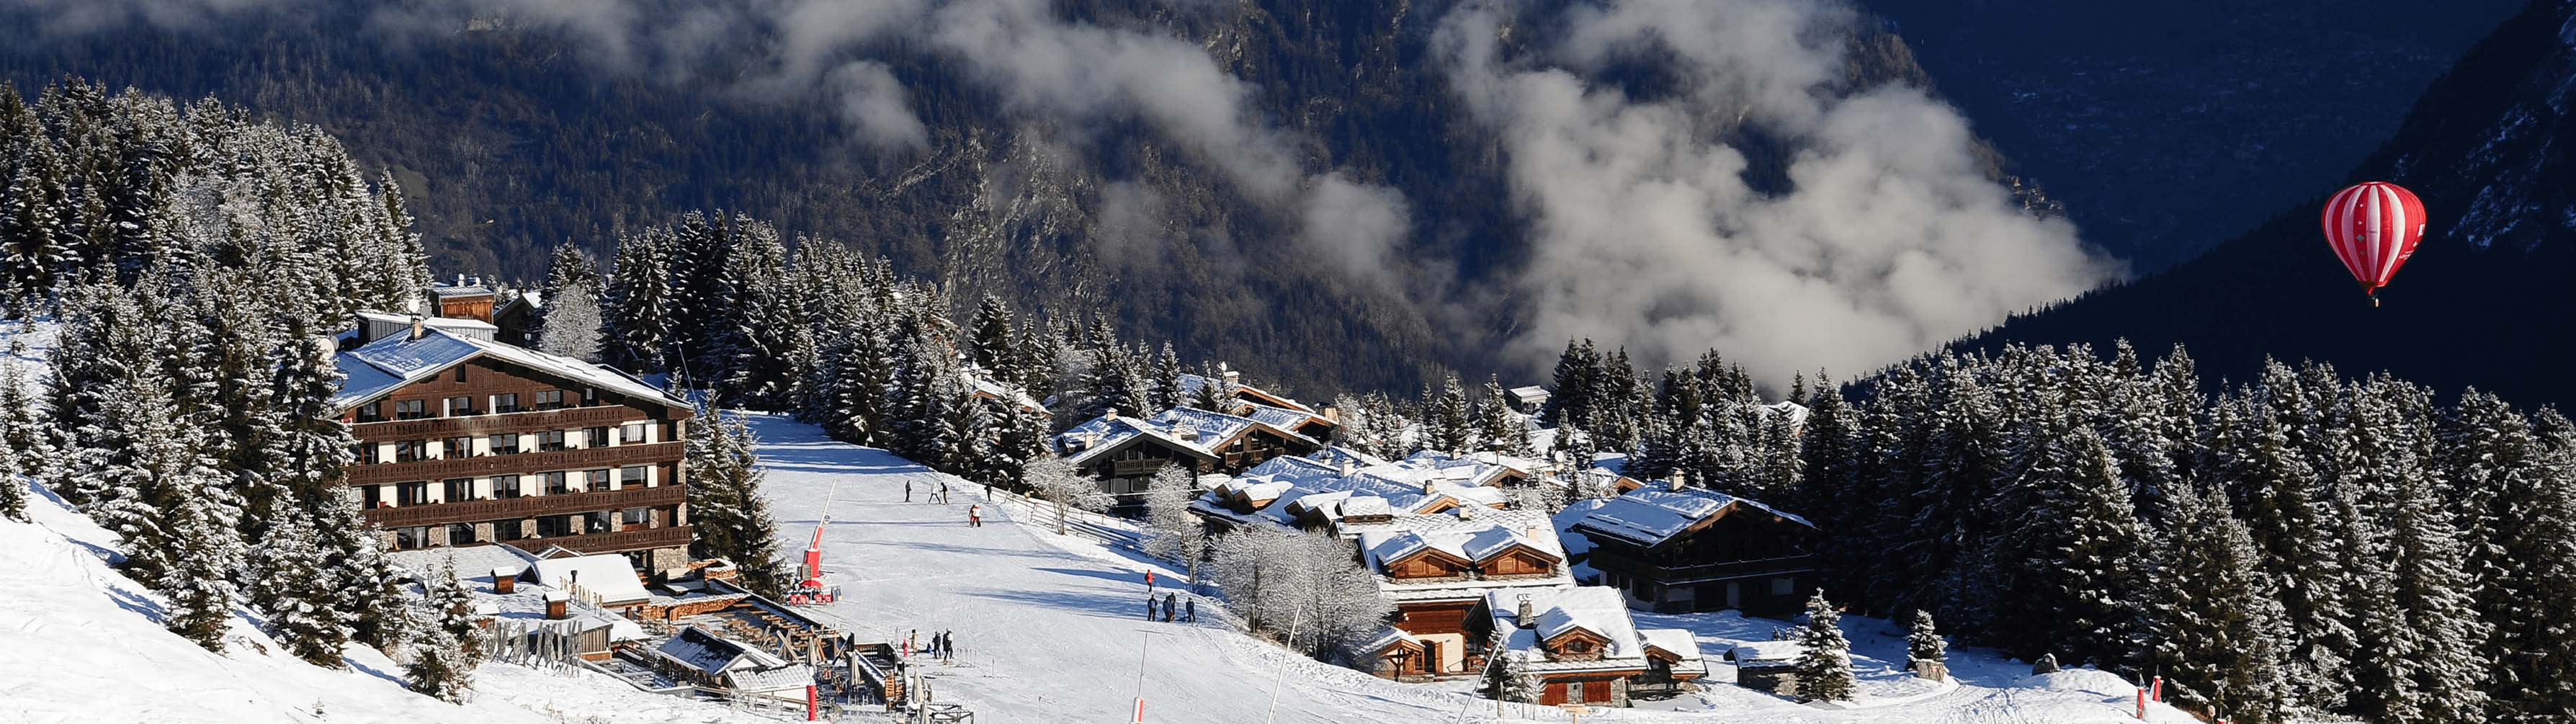 A thick layer of snow covers the white slopes of Courchevel.